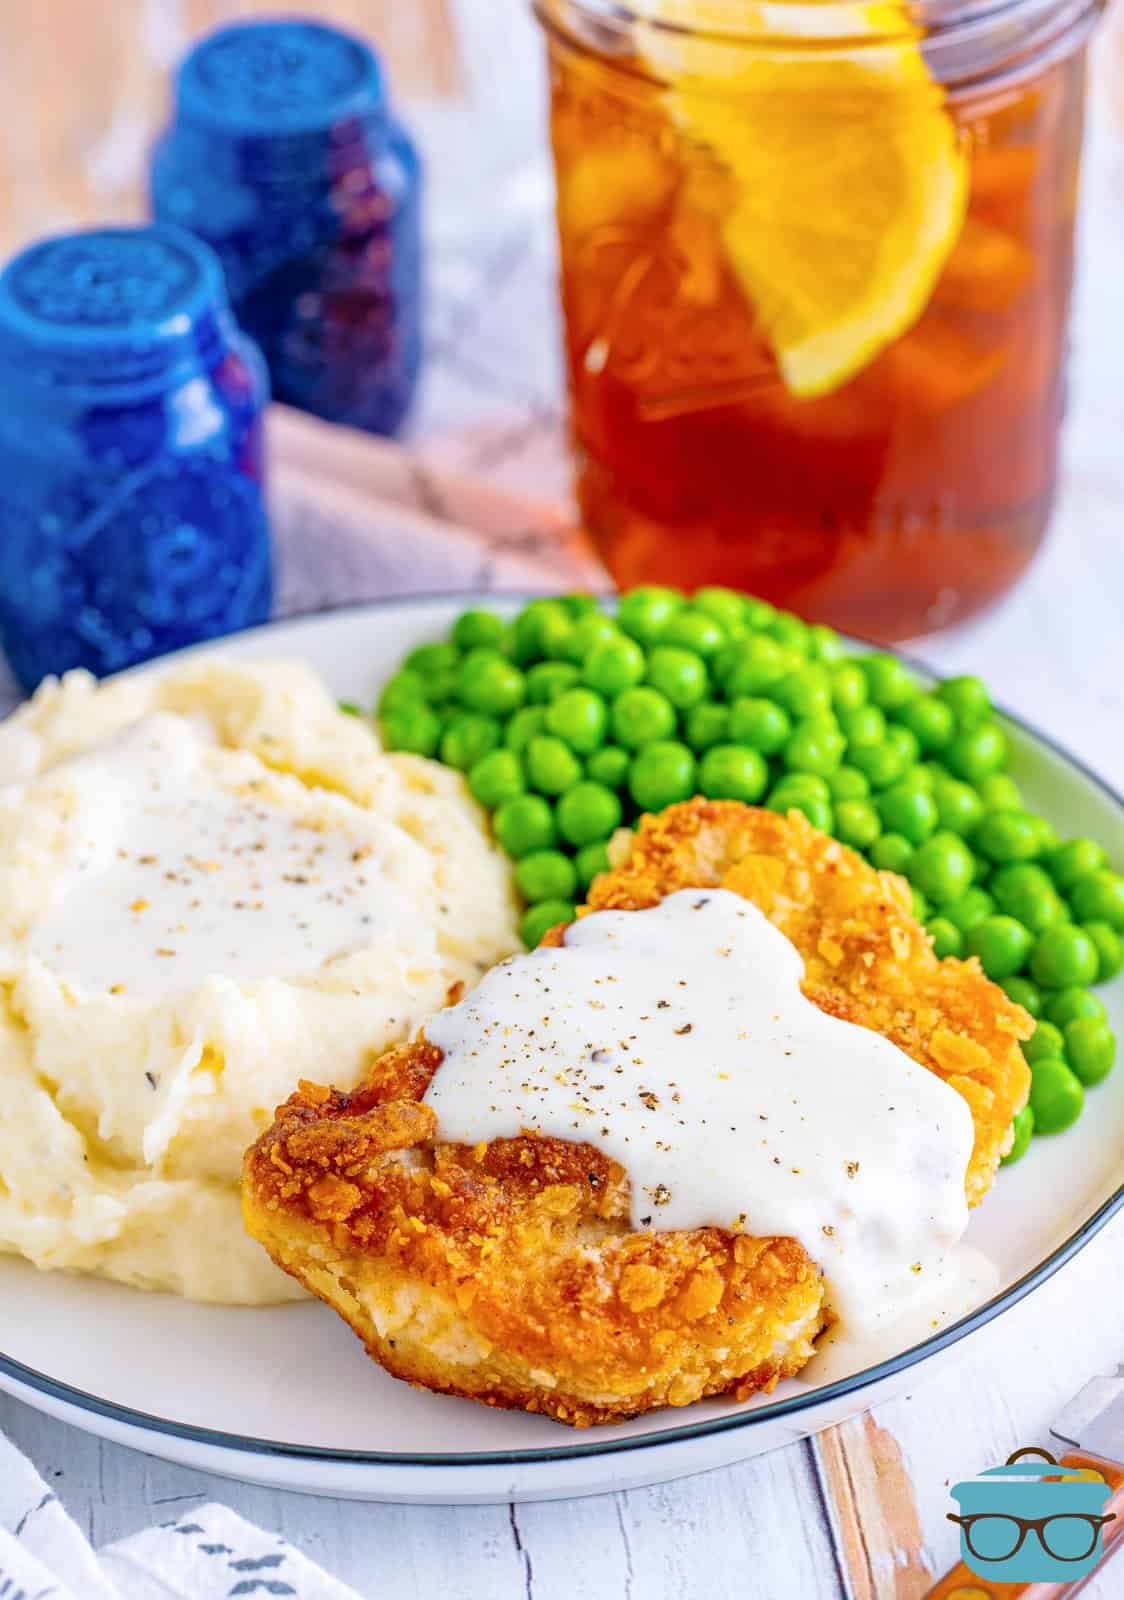 Country Fried Pork Chops and Gravy on plate with mashed potatoes and peas.